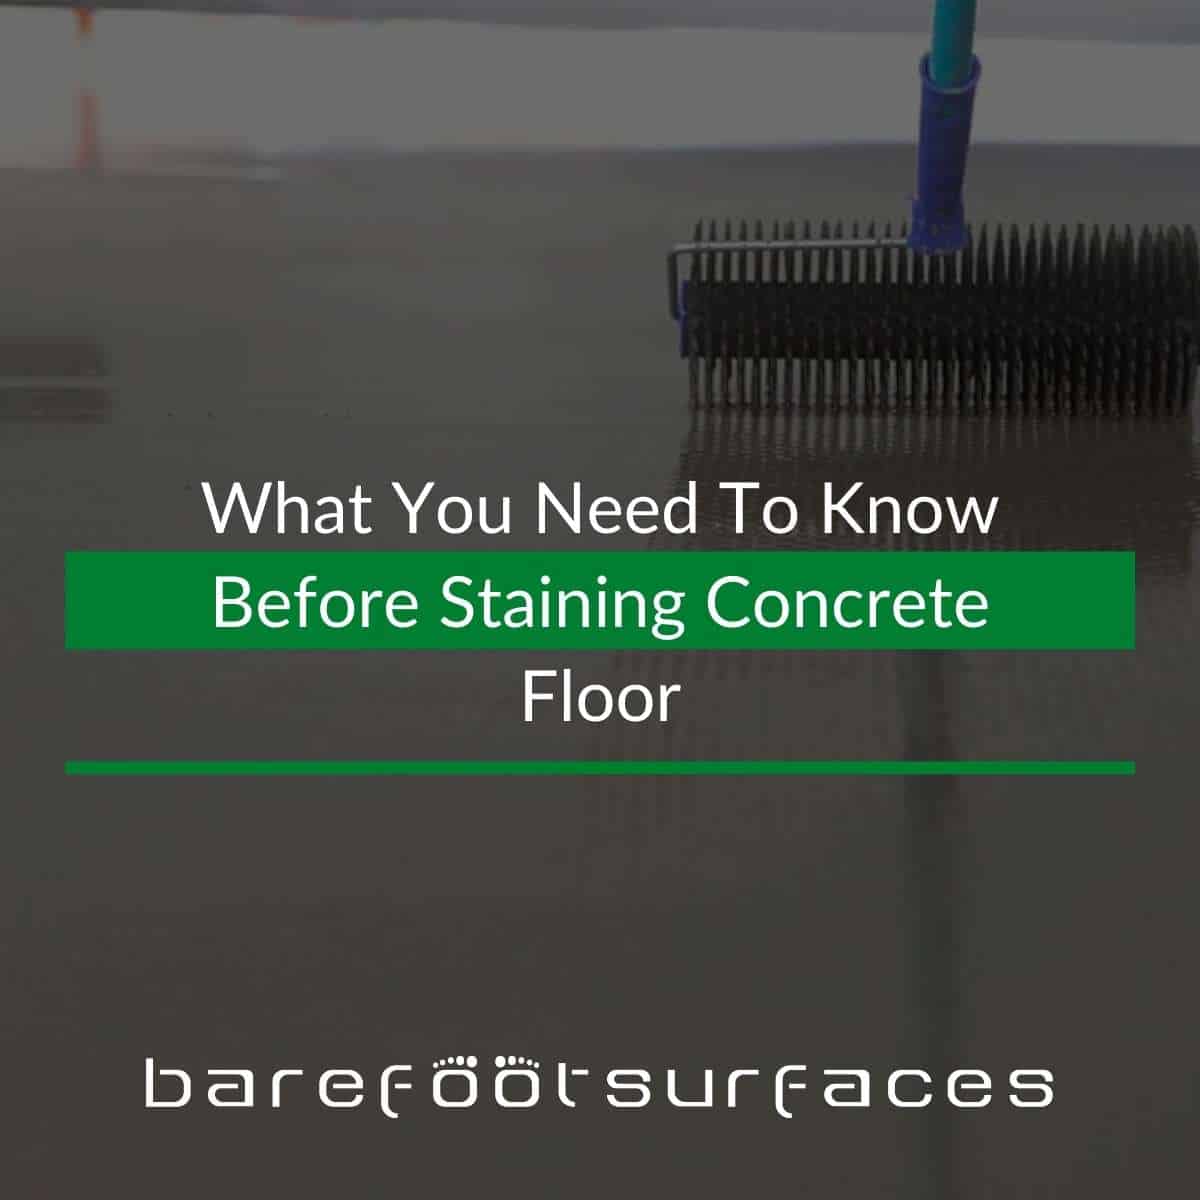 What You Need To Know Before Staining Concrete Floor